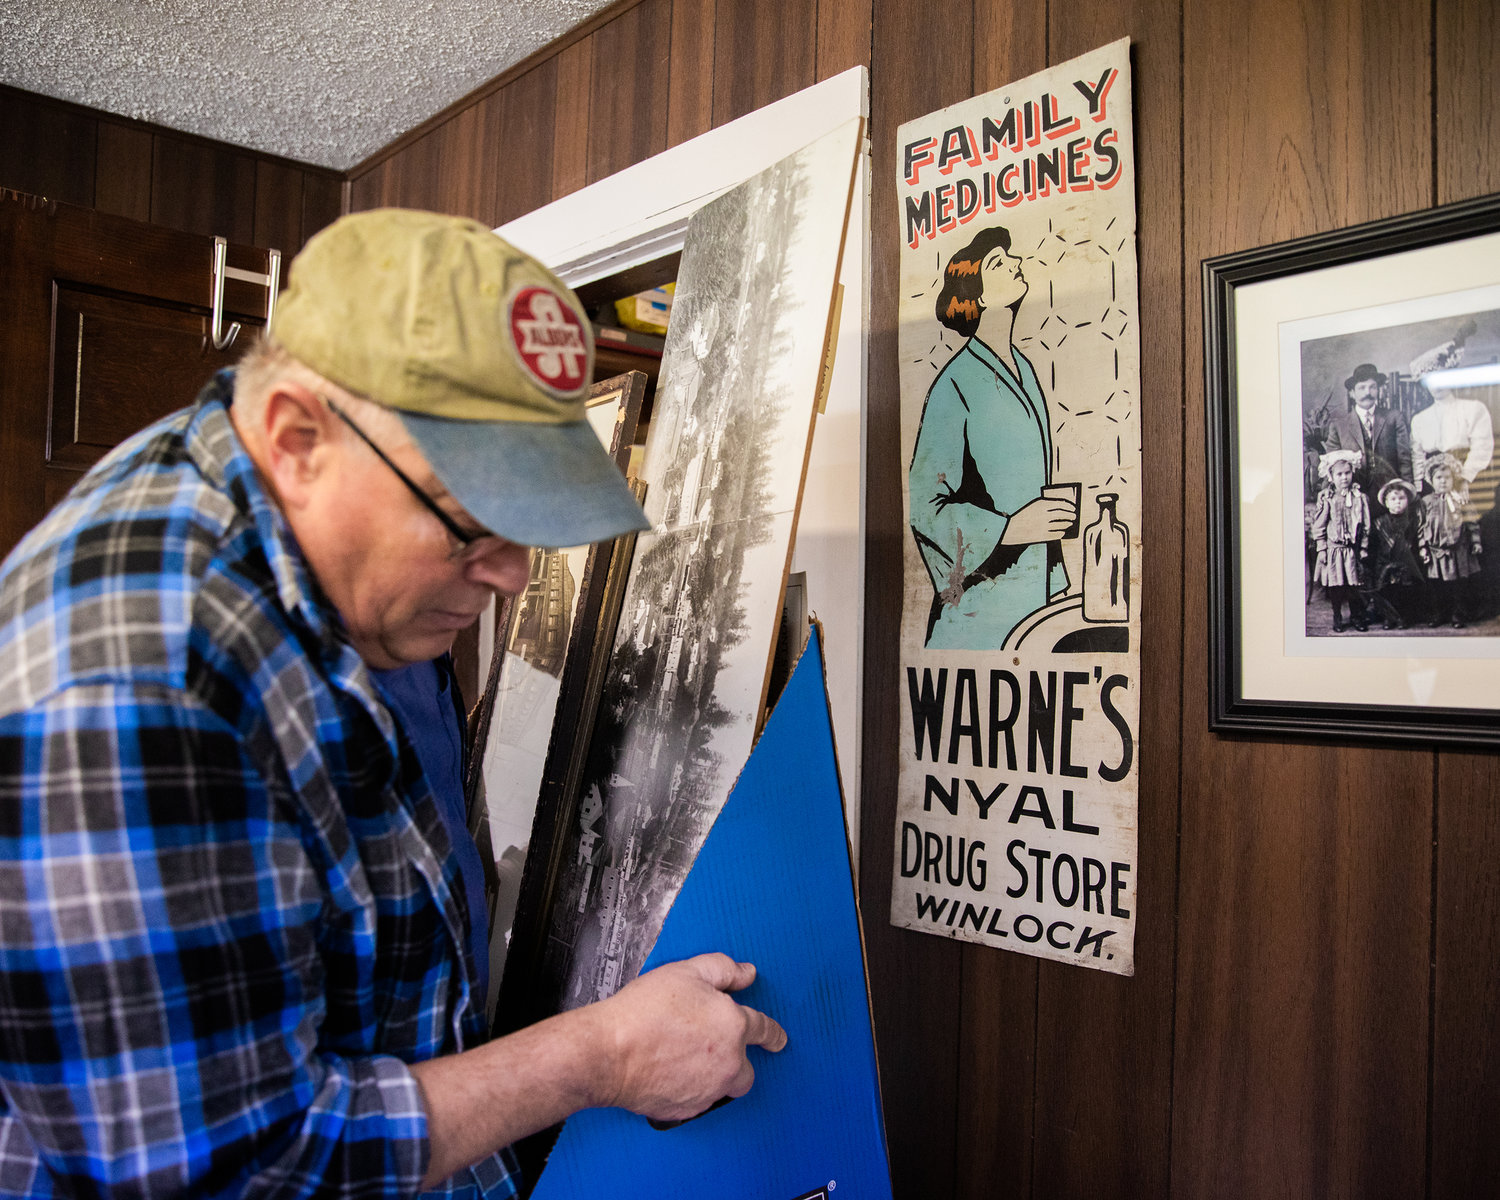 A sign from the Warne’s Nyal Drug Store hangs on display inside the Winlock Historical Museum.